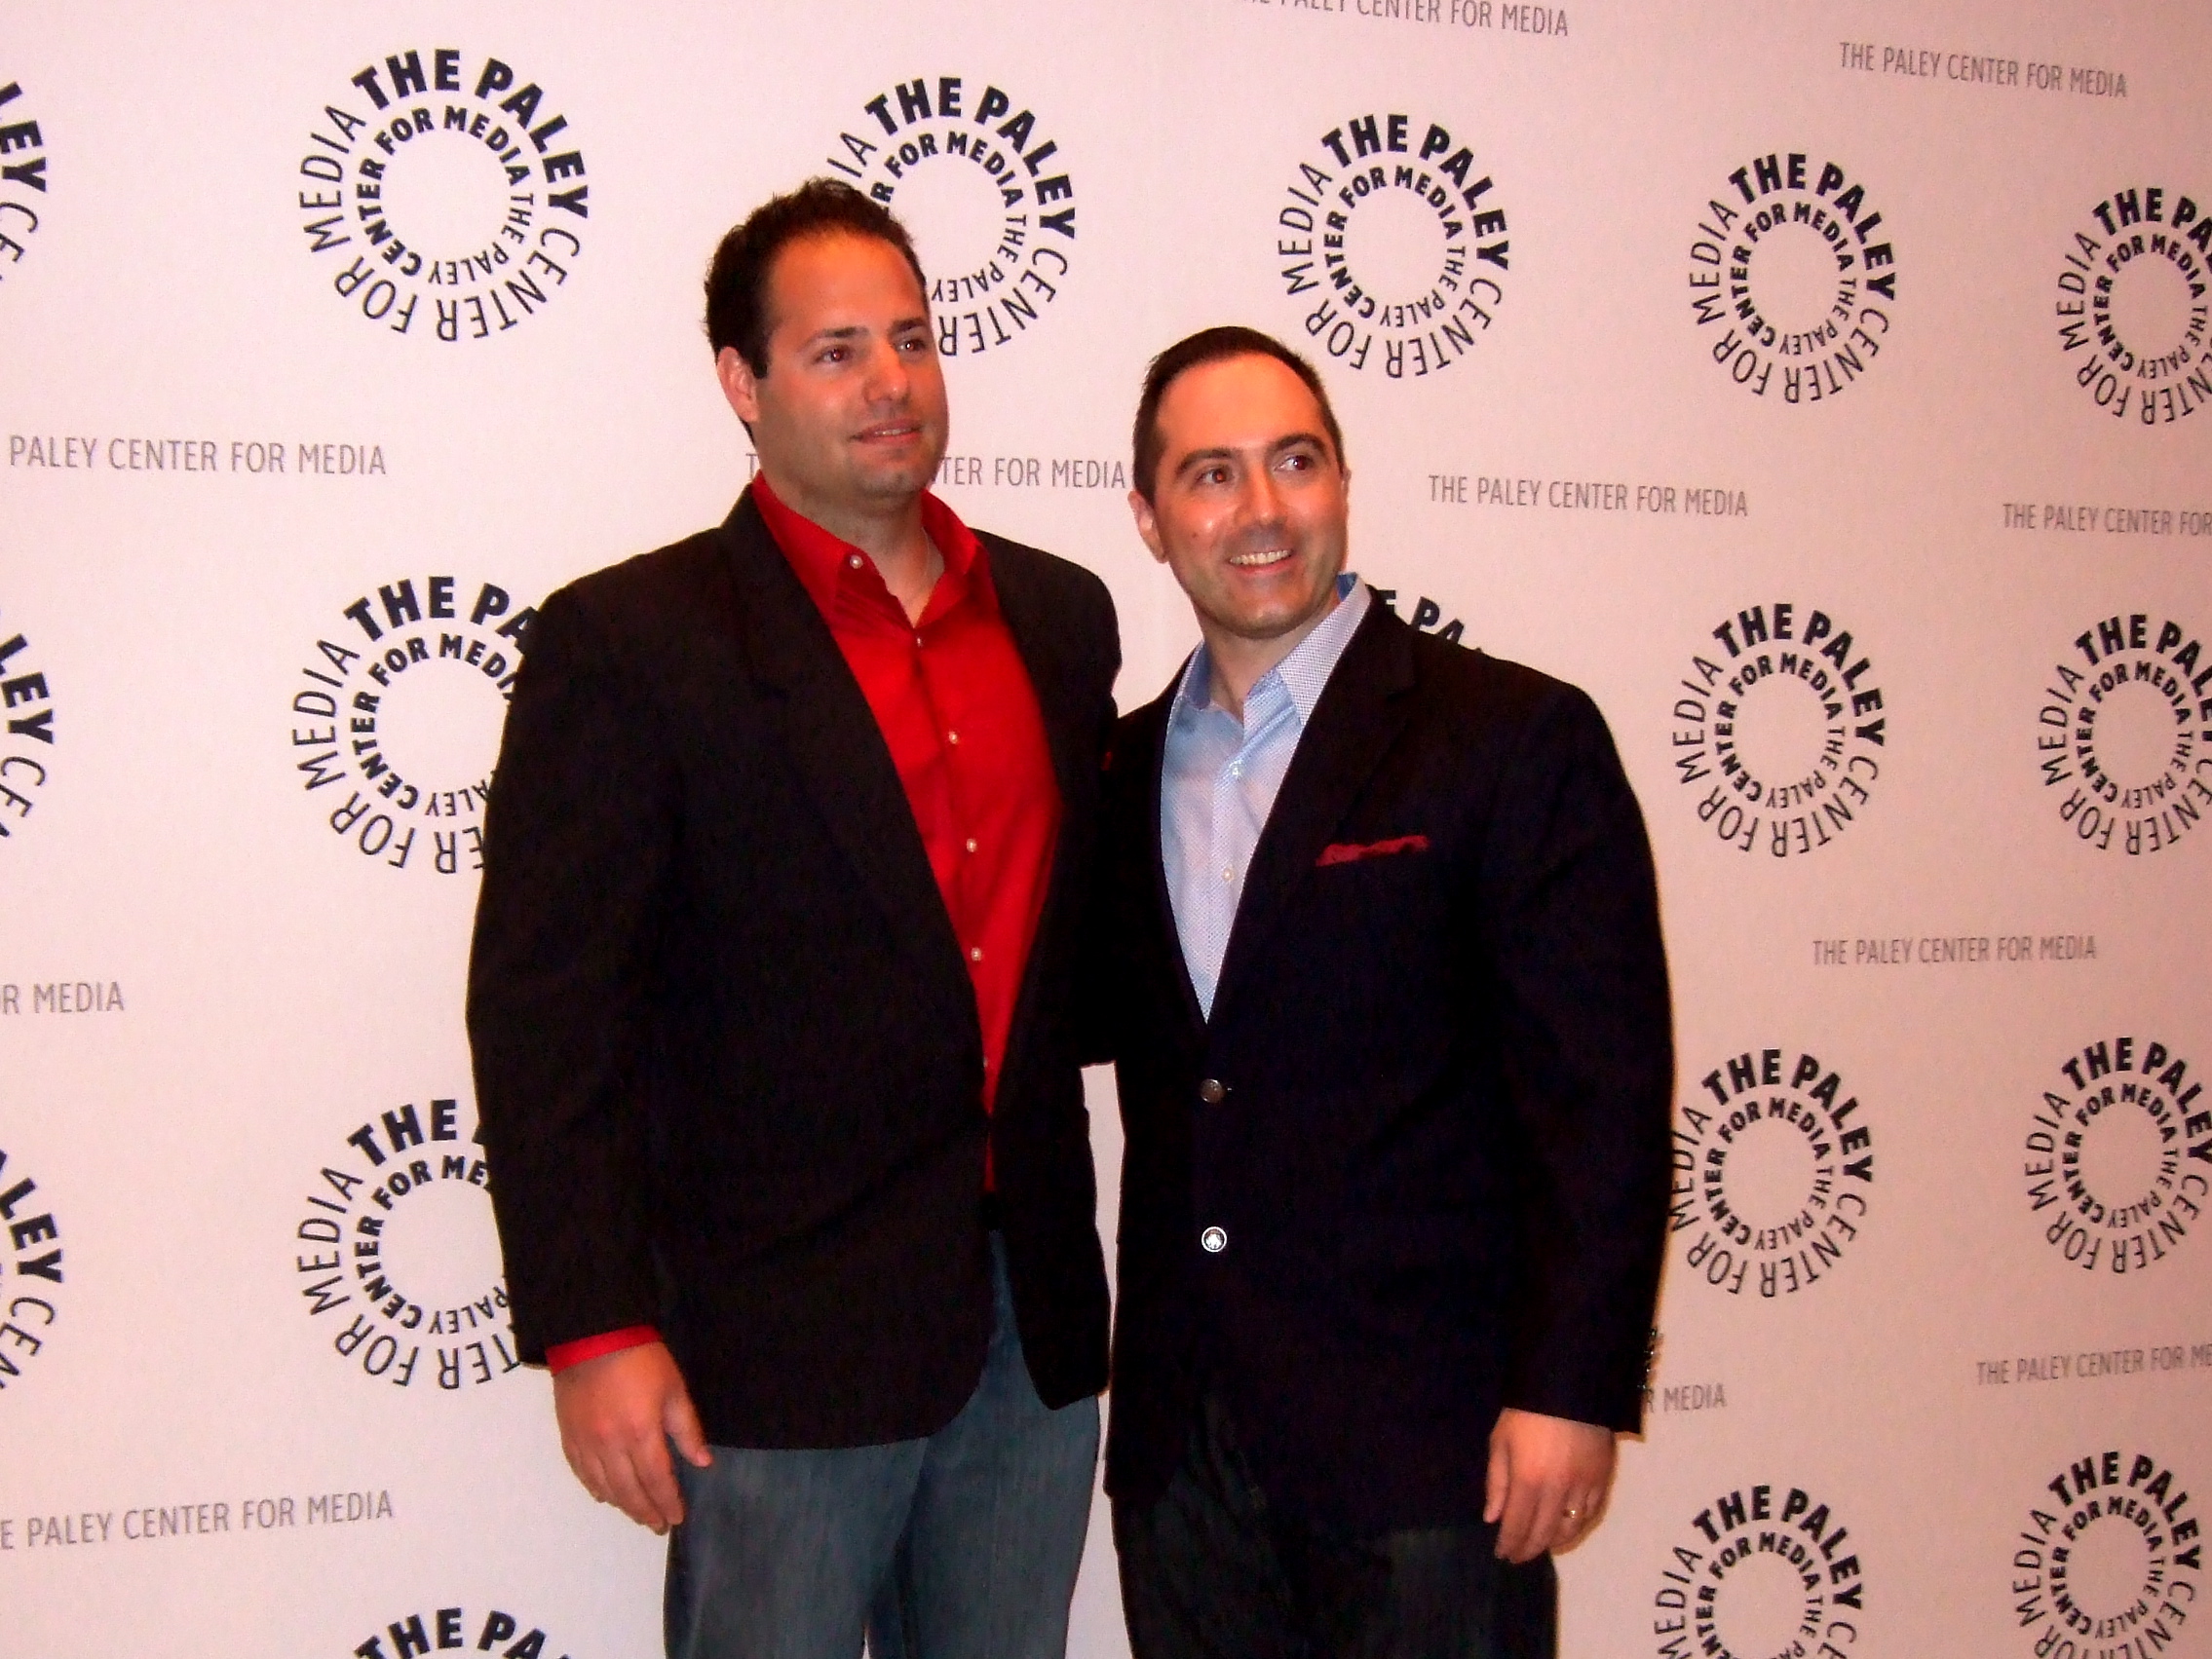 Paley Center NYC